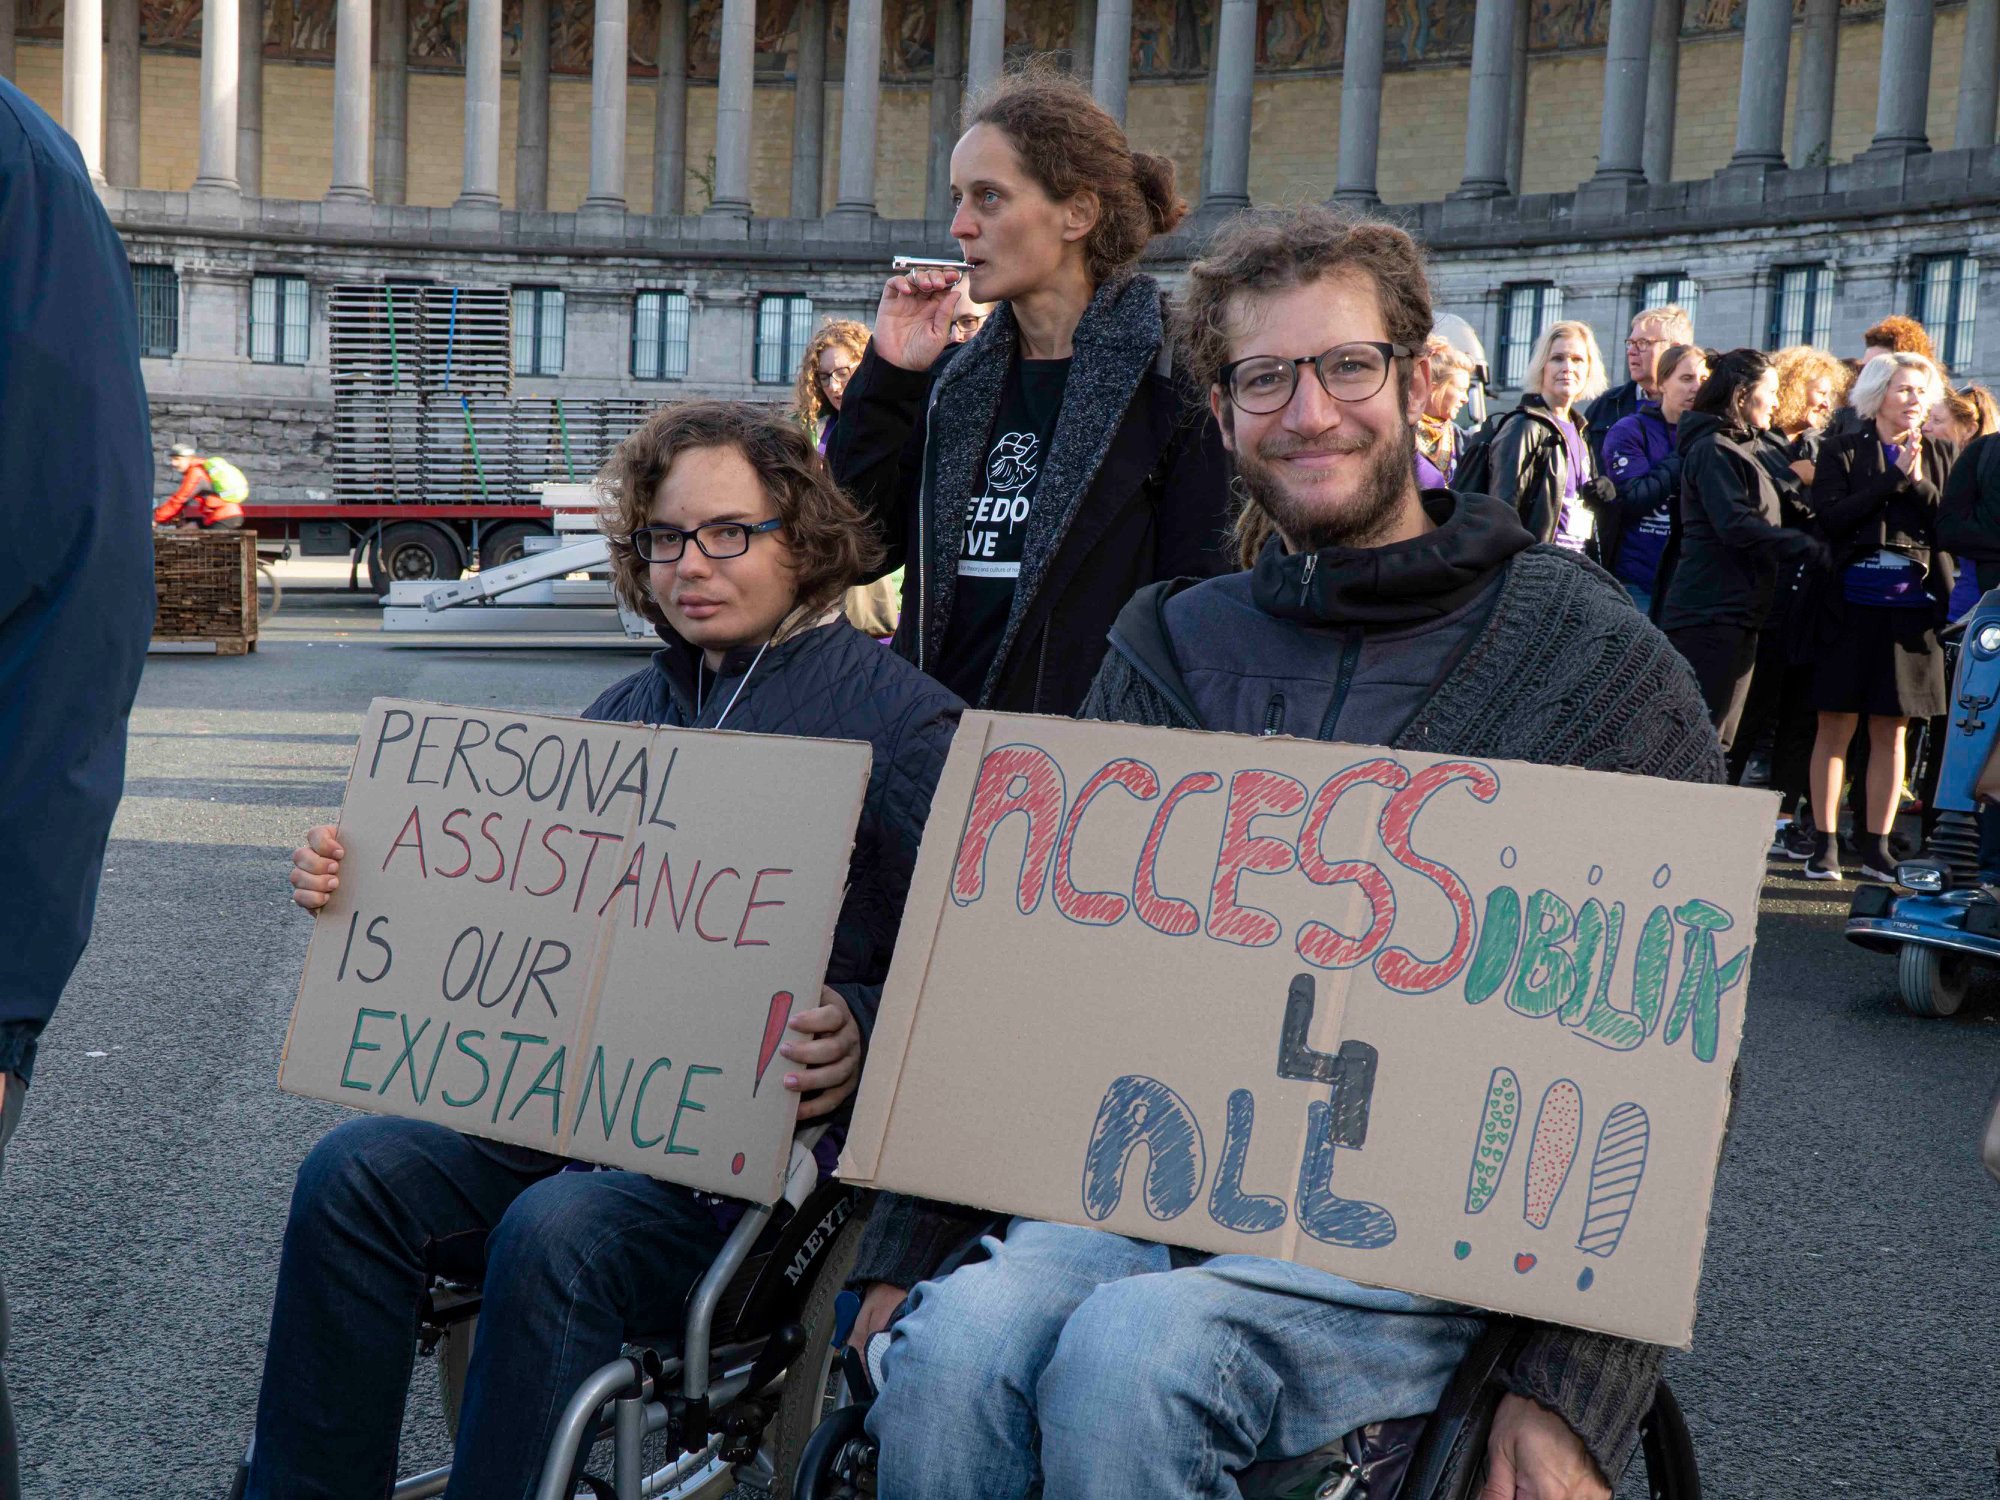 Two wheelchair users holding banners